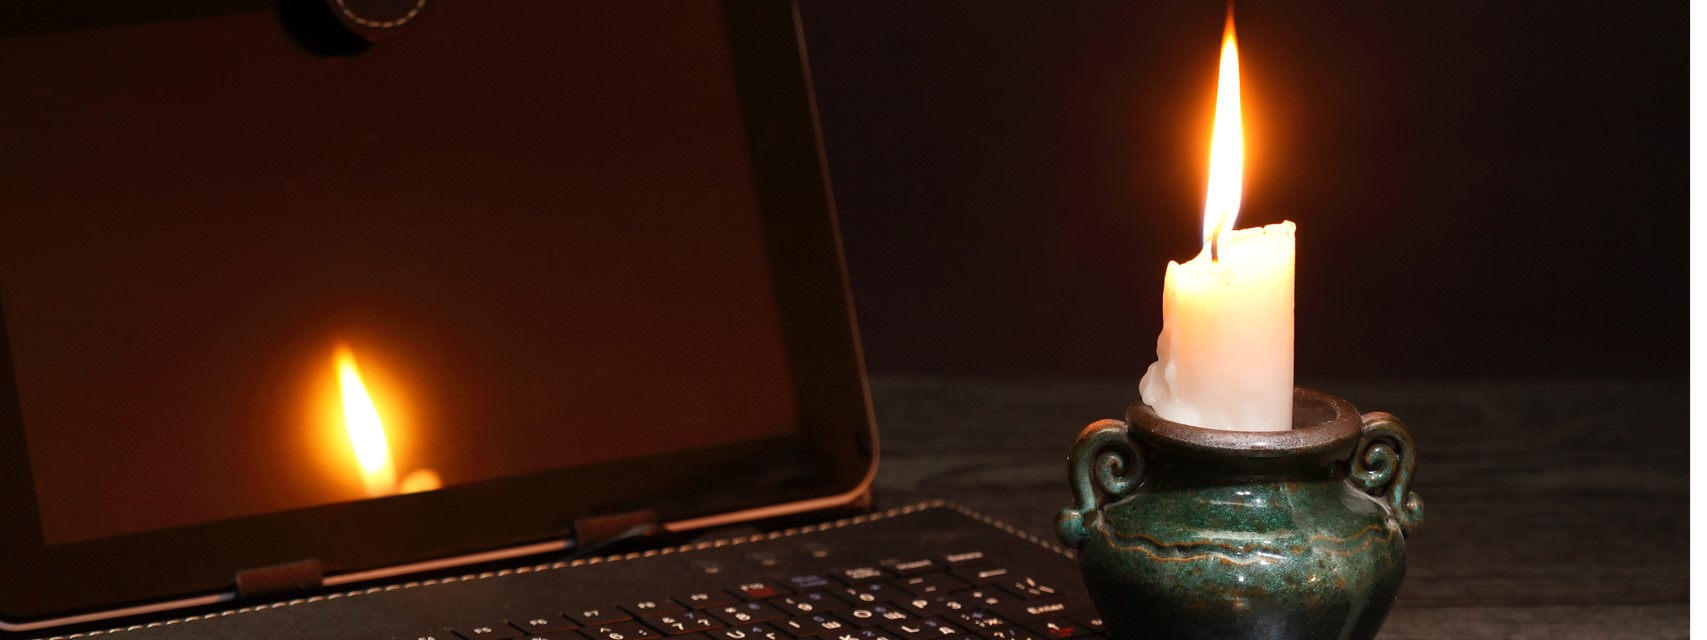 Picture of a laptop with a candle during a blackout